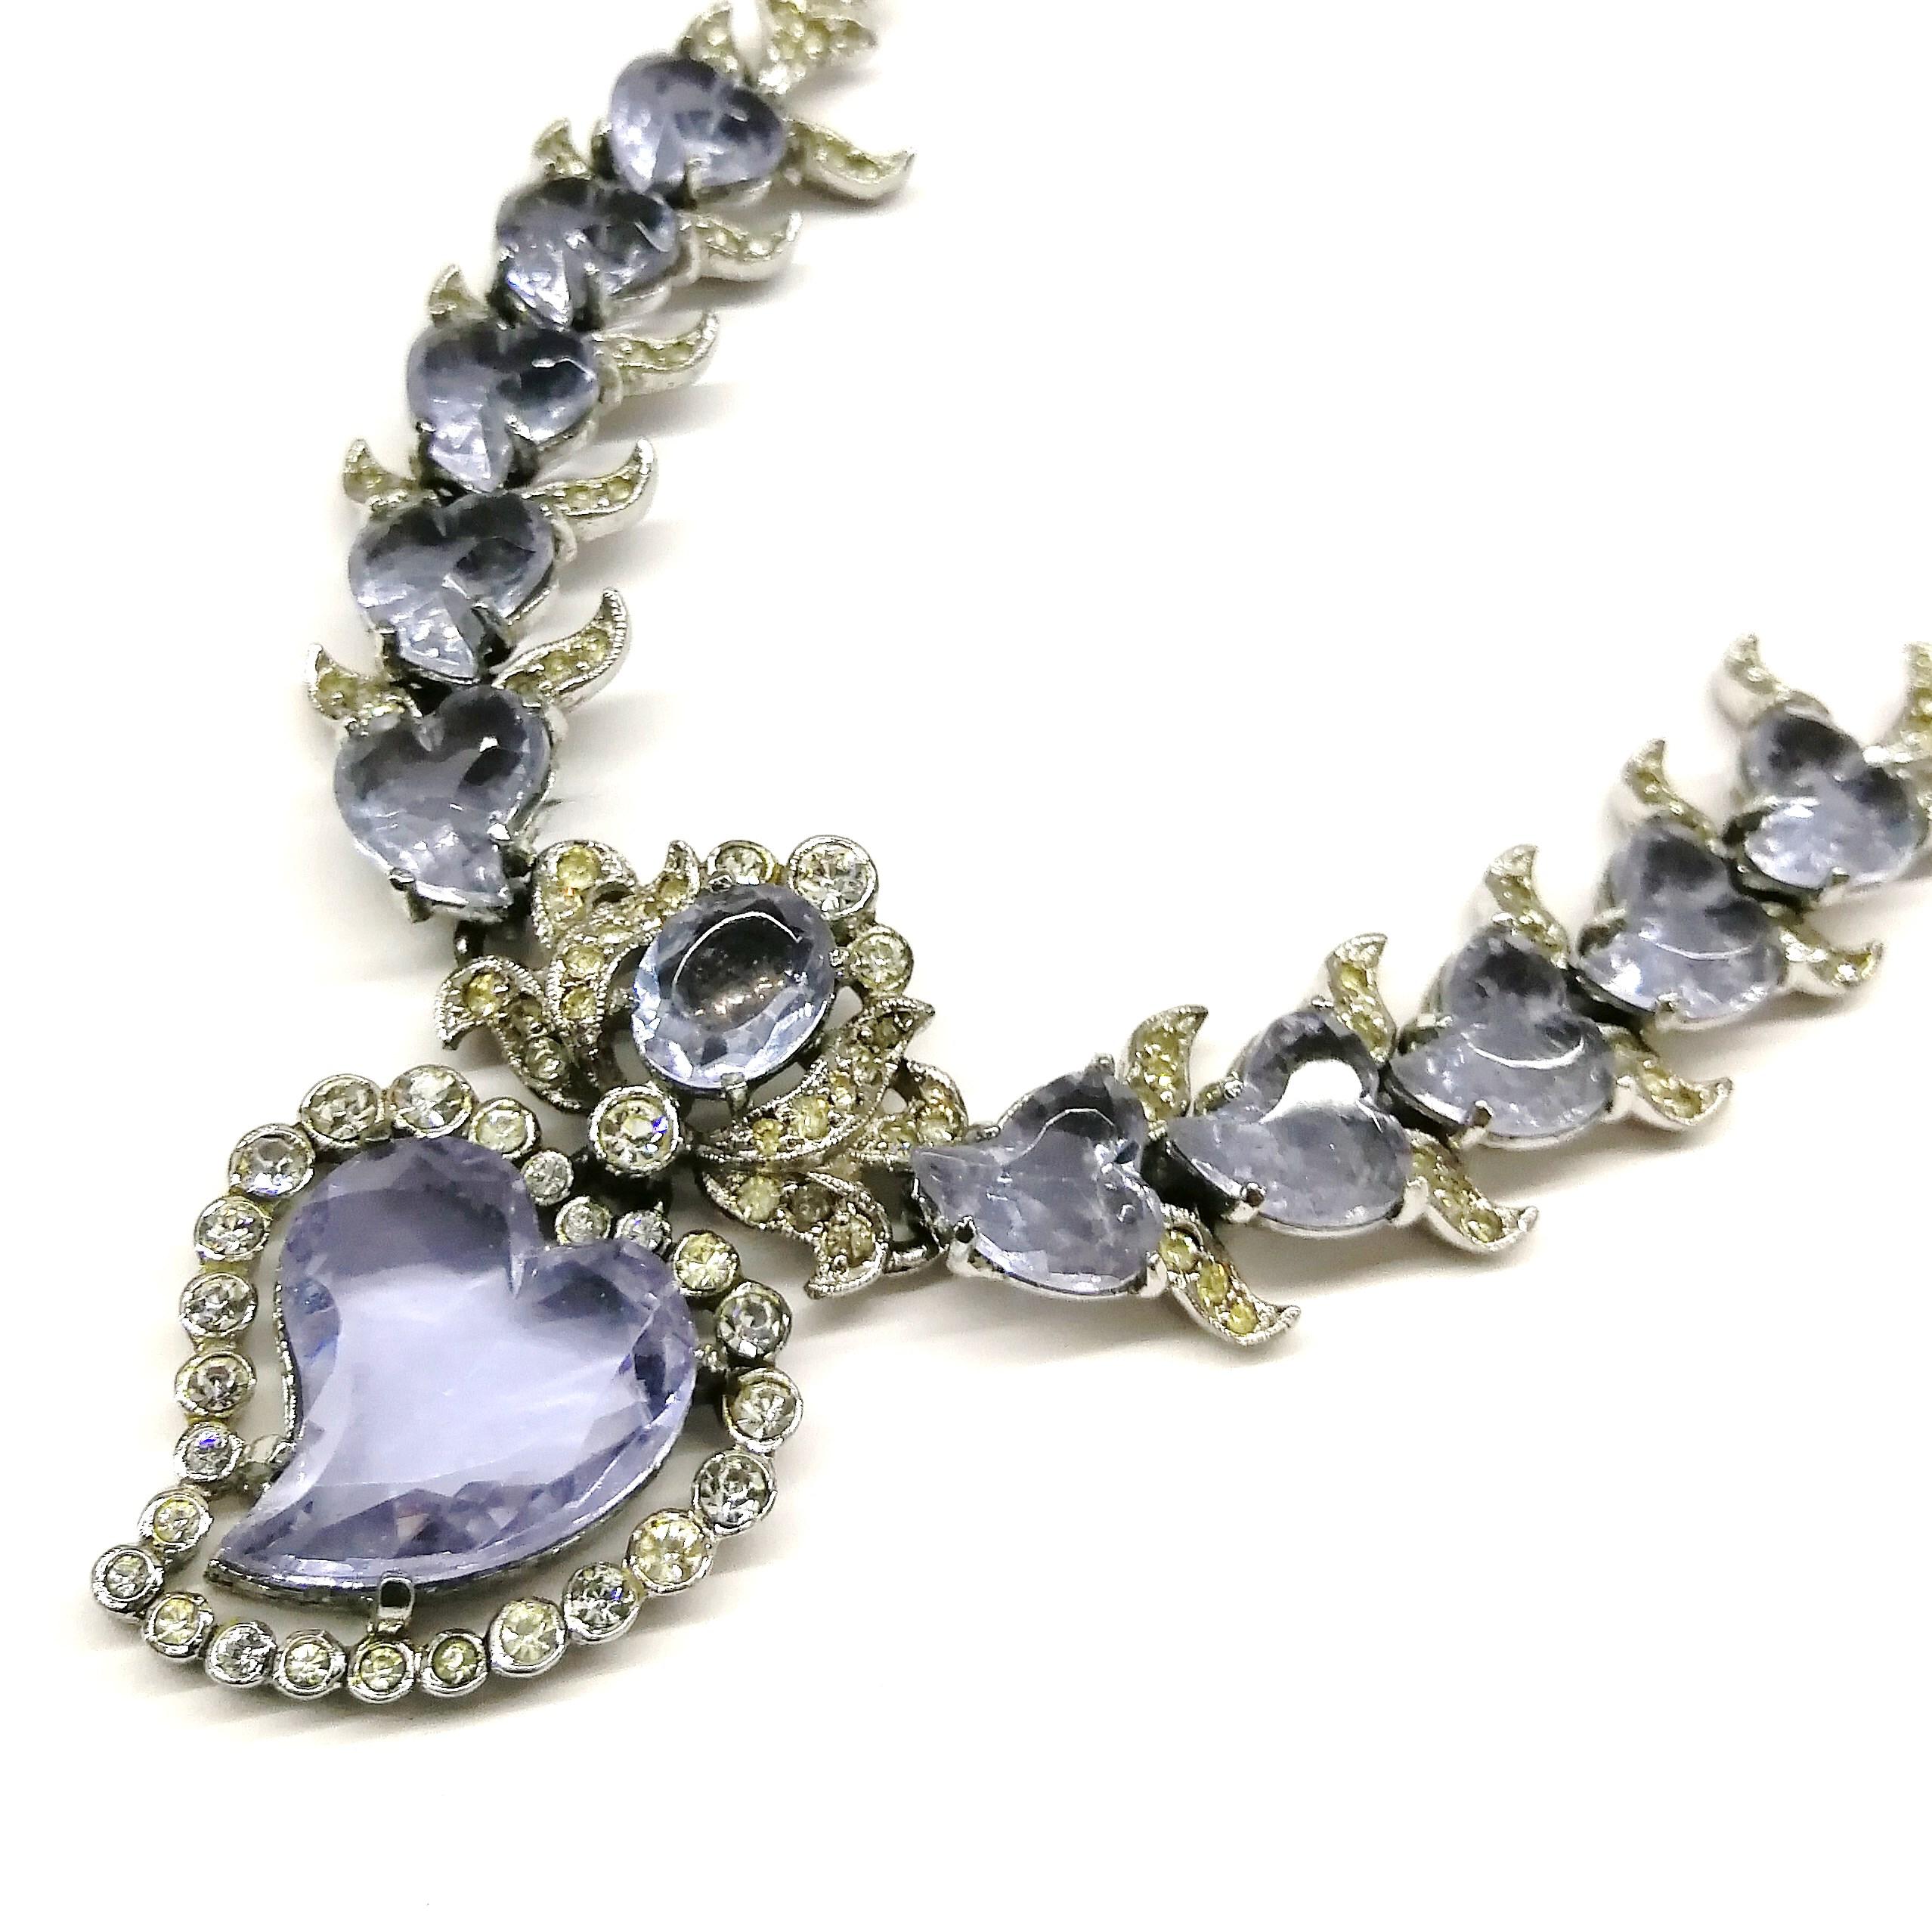 An exquisite and rare parure, a necklace, bracelet and matching earrings, made by Mitchel Maer for Christian Dior in the early 1950s. Made from clear pastes, and set with soft lilac moulded glass 'witch's hearts' - a traditional heart, 'twisted' at